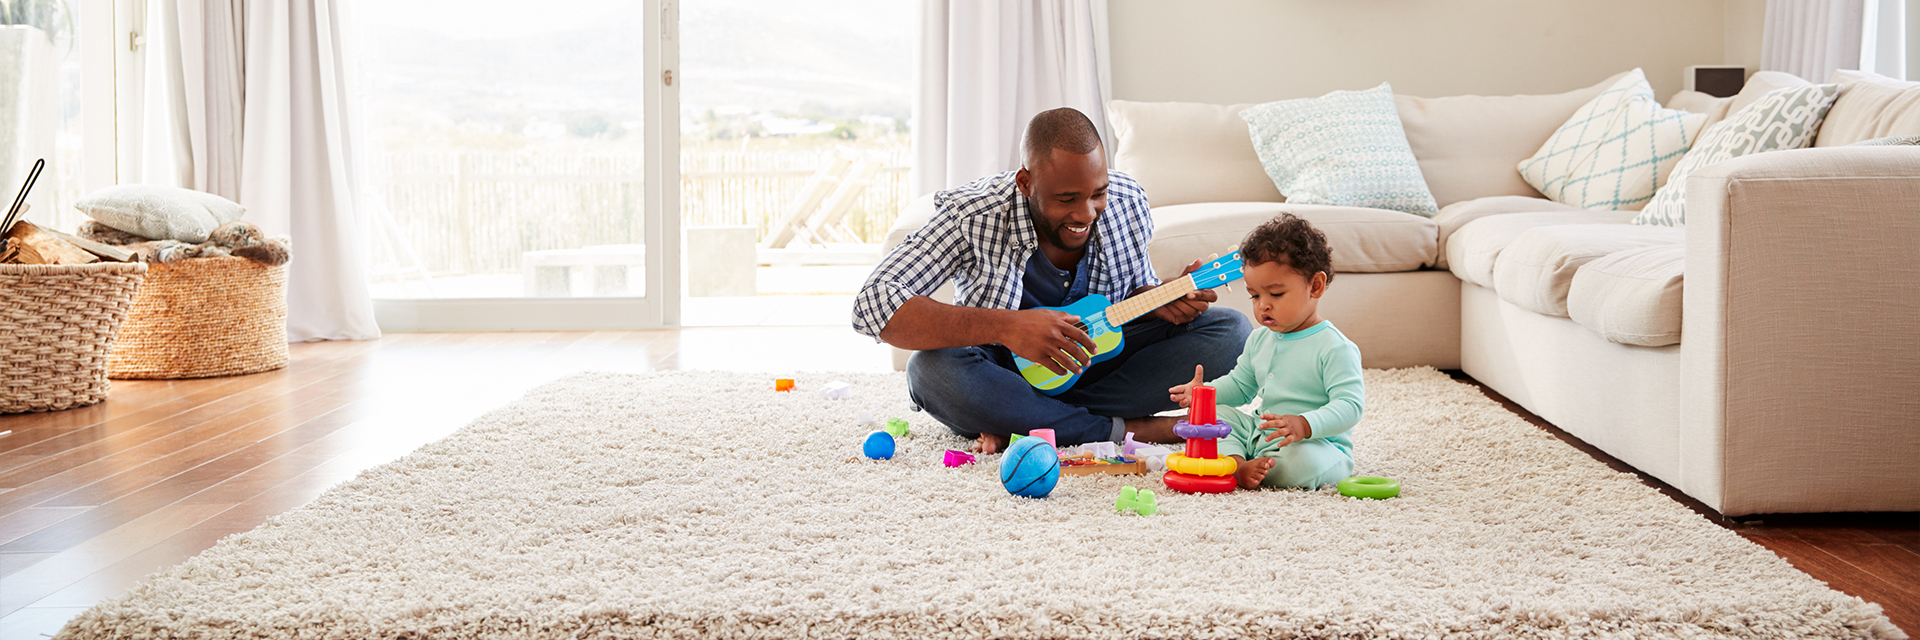 Pediatricians Share How to Childproof a Living Room and Risks to Avoid